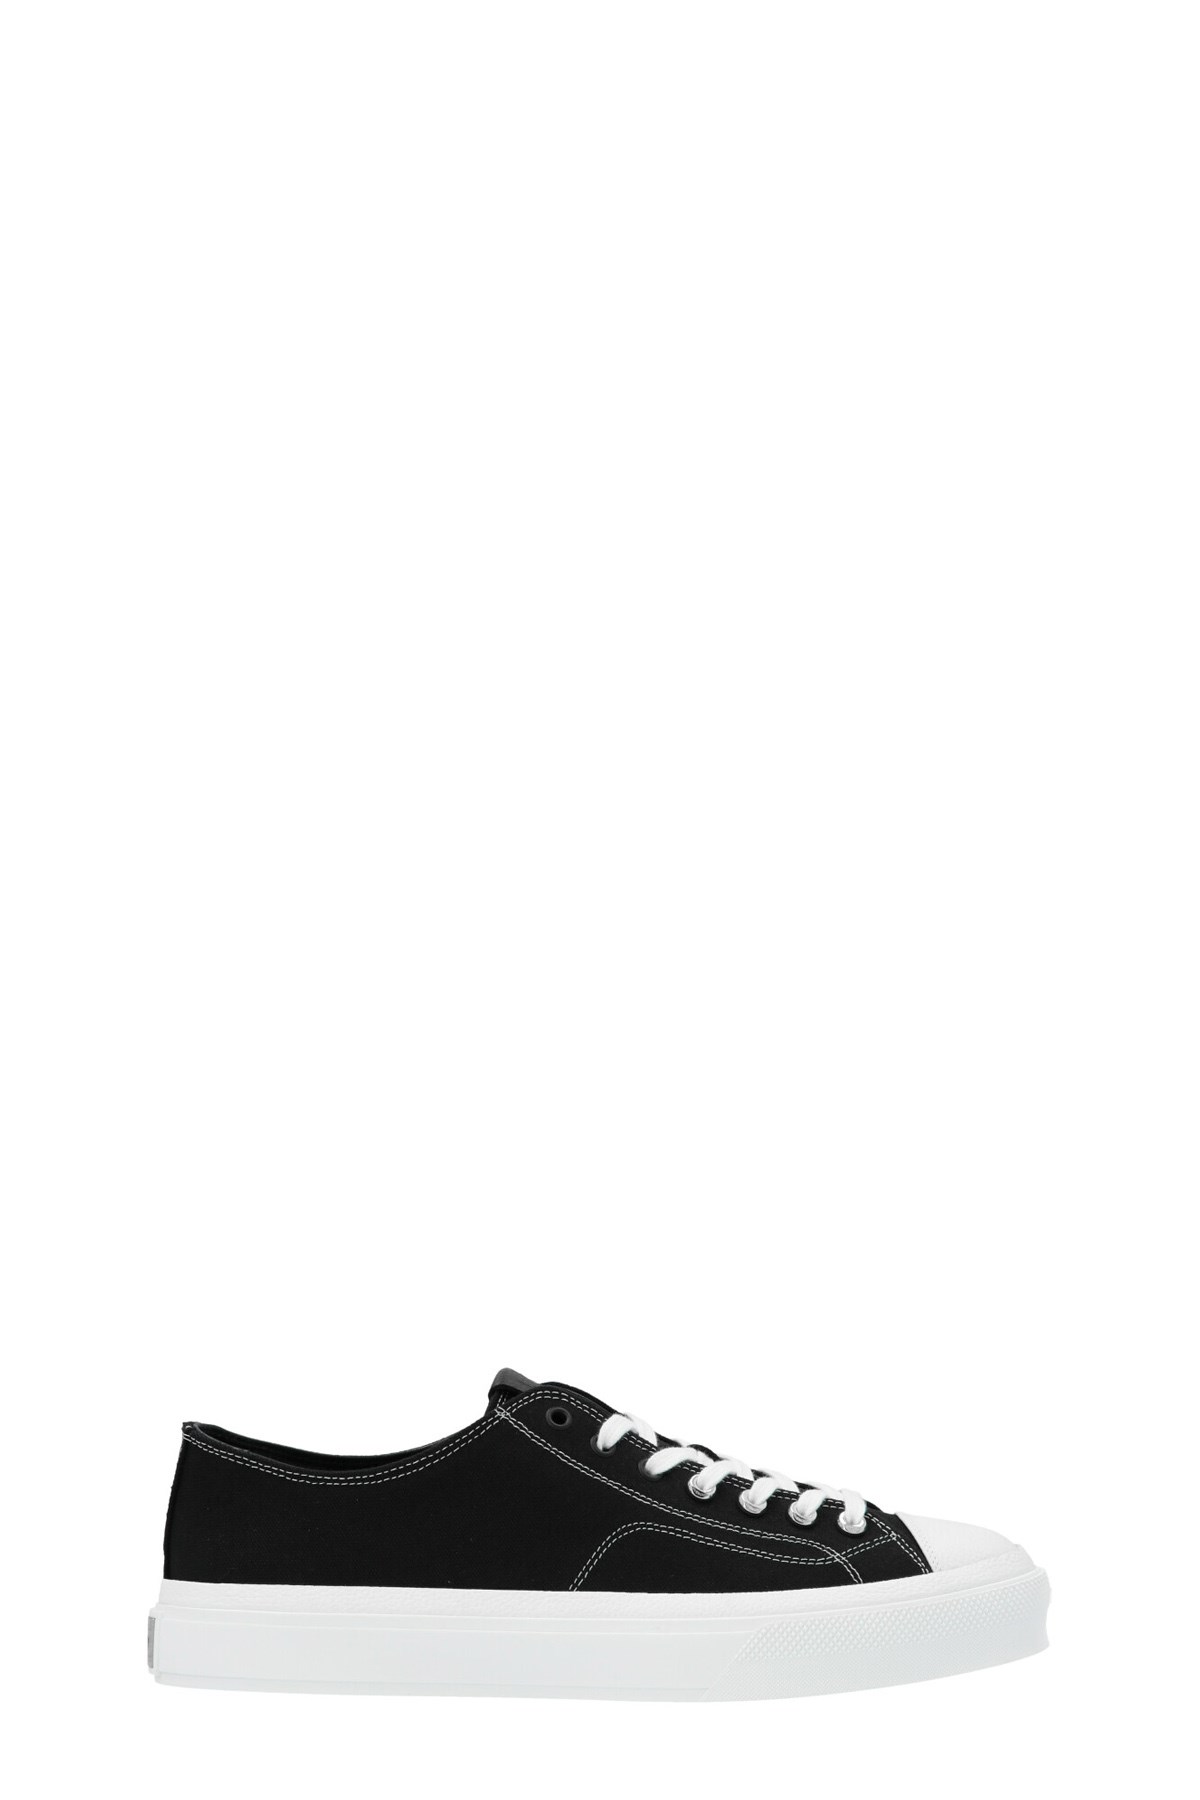 GIVENCHY Sneaker 'City Low'